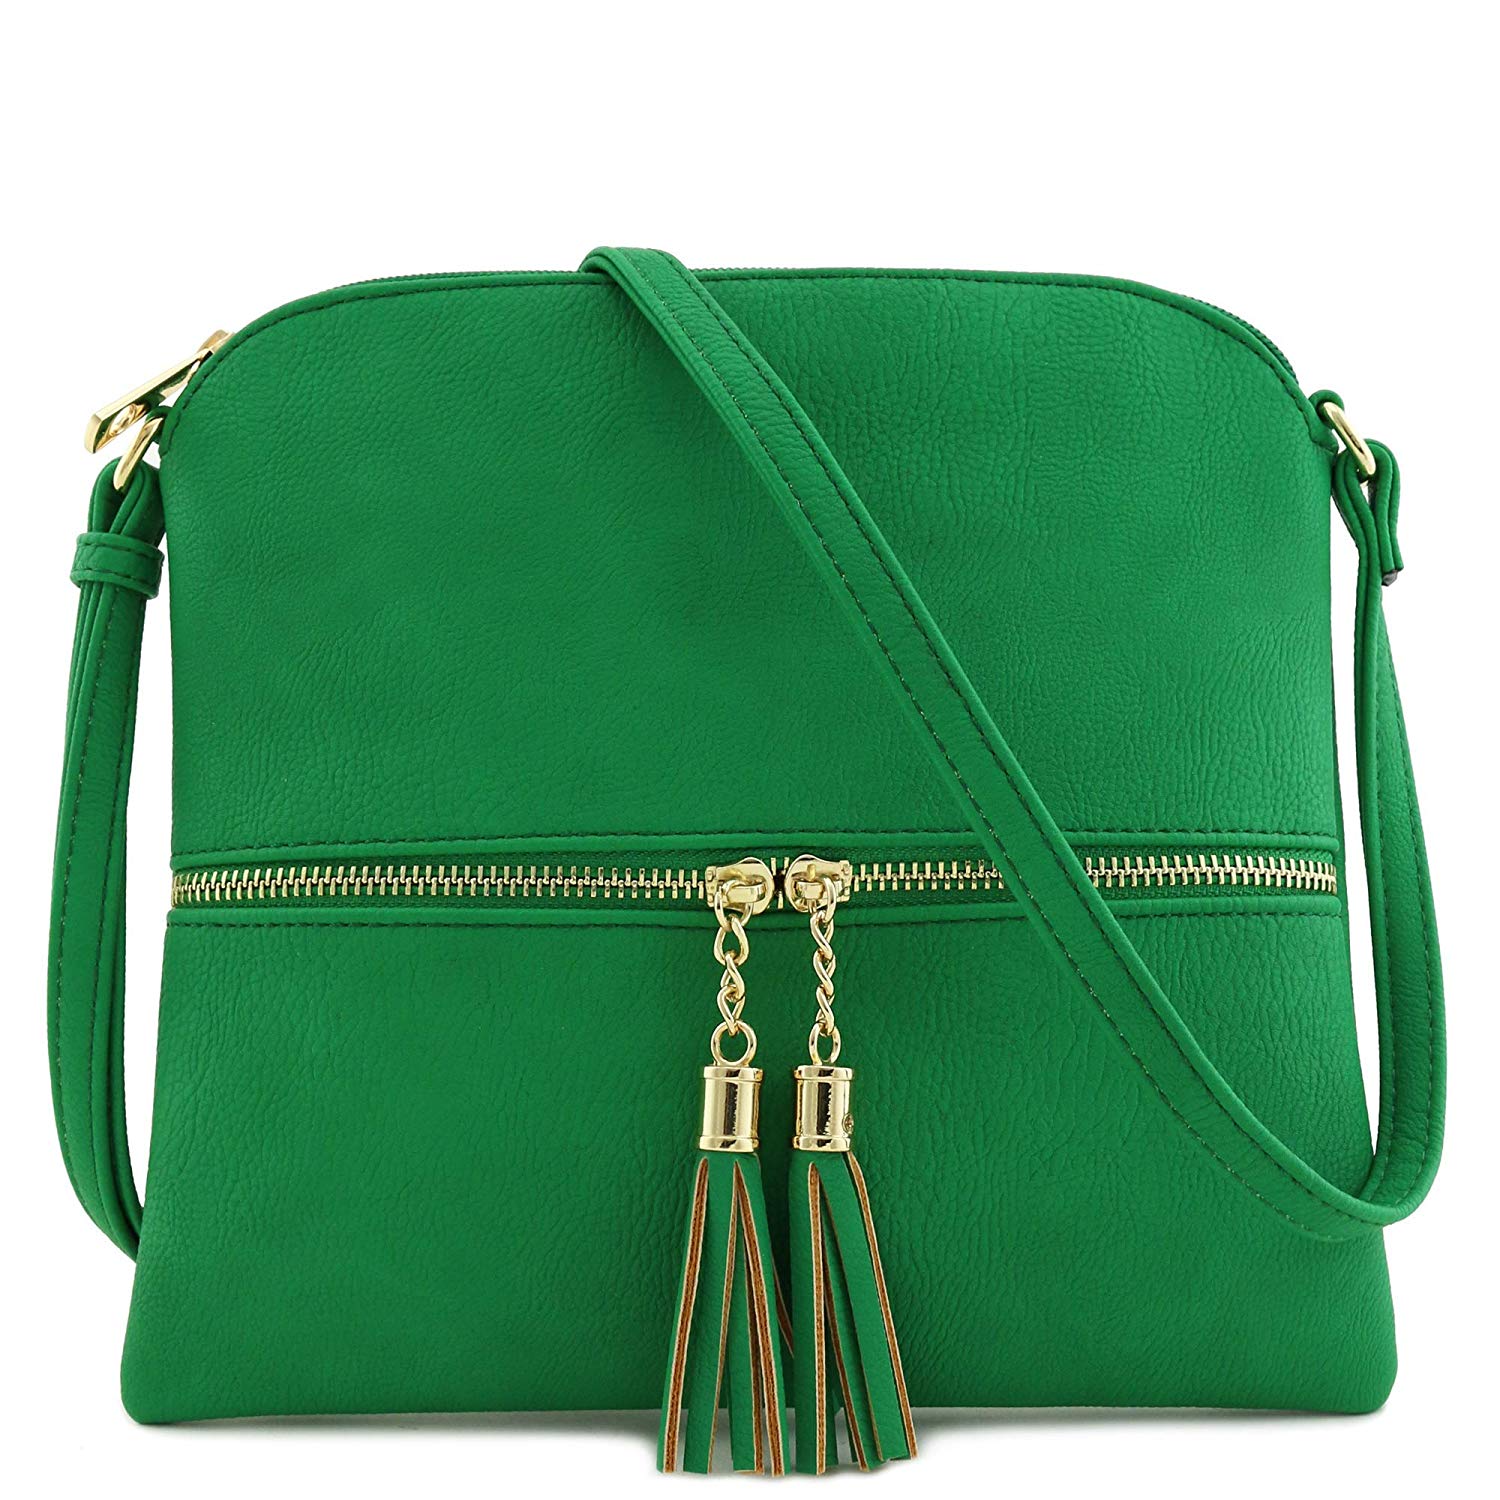 Review of Lightweight Medium Crossbody Bag with Tassel by Deluxity